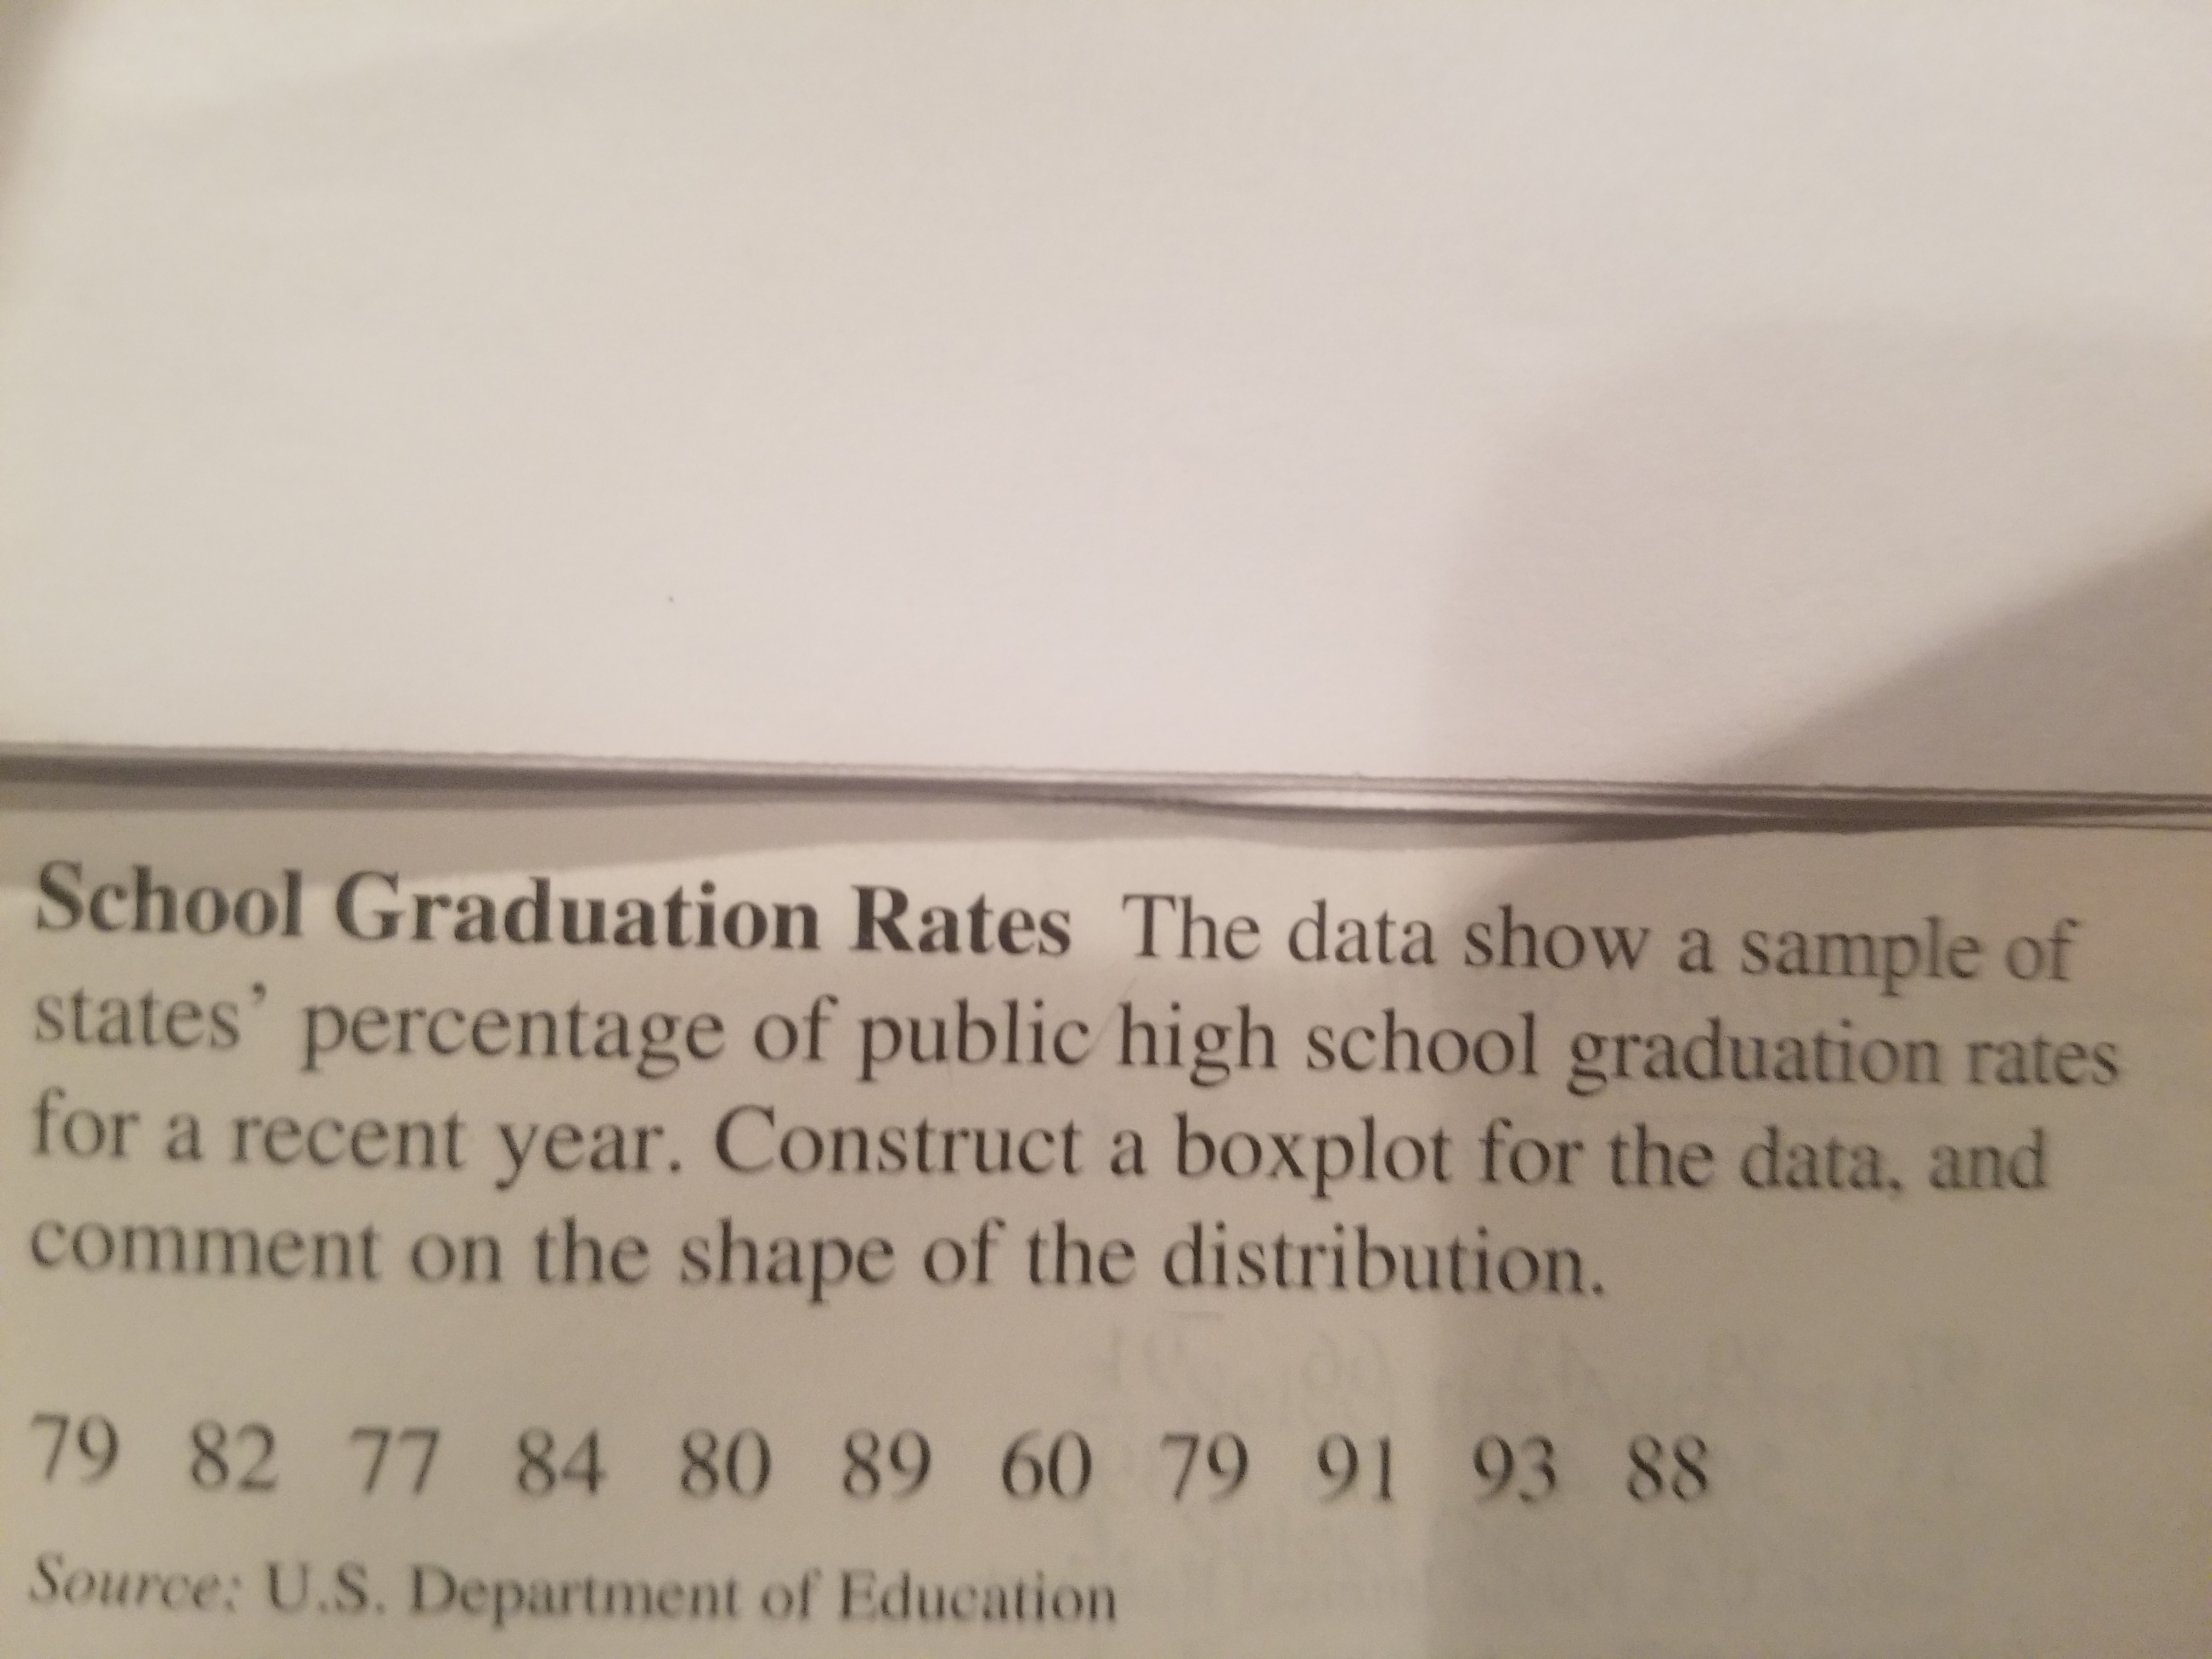 School Graduation Rates The data show a sample of
states' percentage of public high school graduation rates
for a recent year. Construct a boxplot for the data, and
comment on the shape of the distribution.
79 82 77 84 80 89 60 79 91 93 88
Source: U.S. Department of Education
